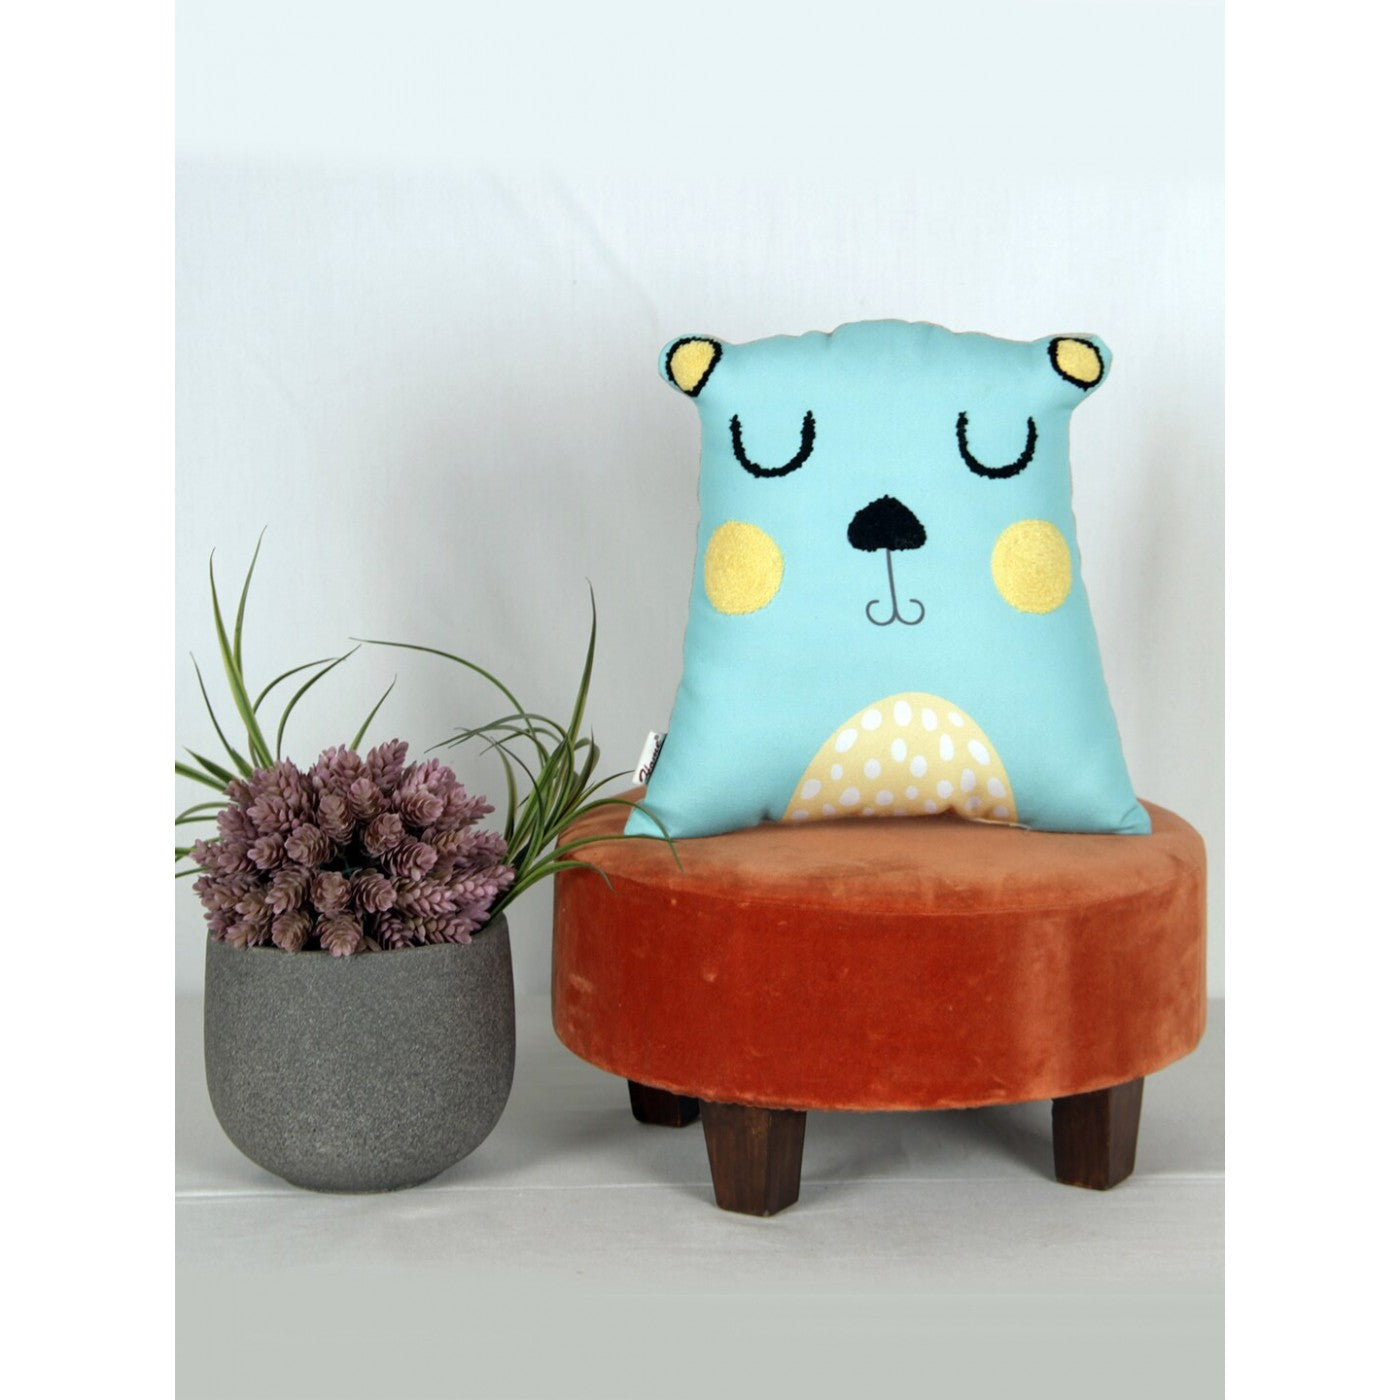 Blue Bear Bliss Embroidered Bear-Shaped Cushion for Snuggly Adventures